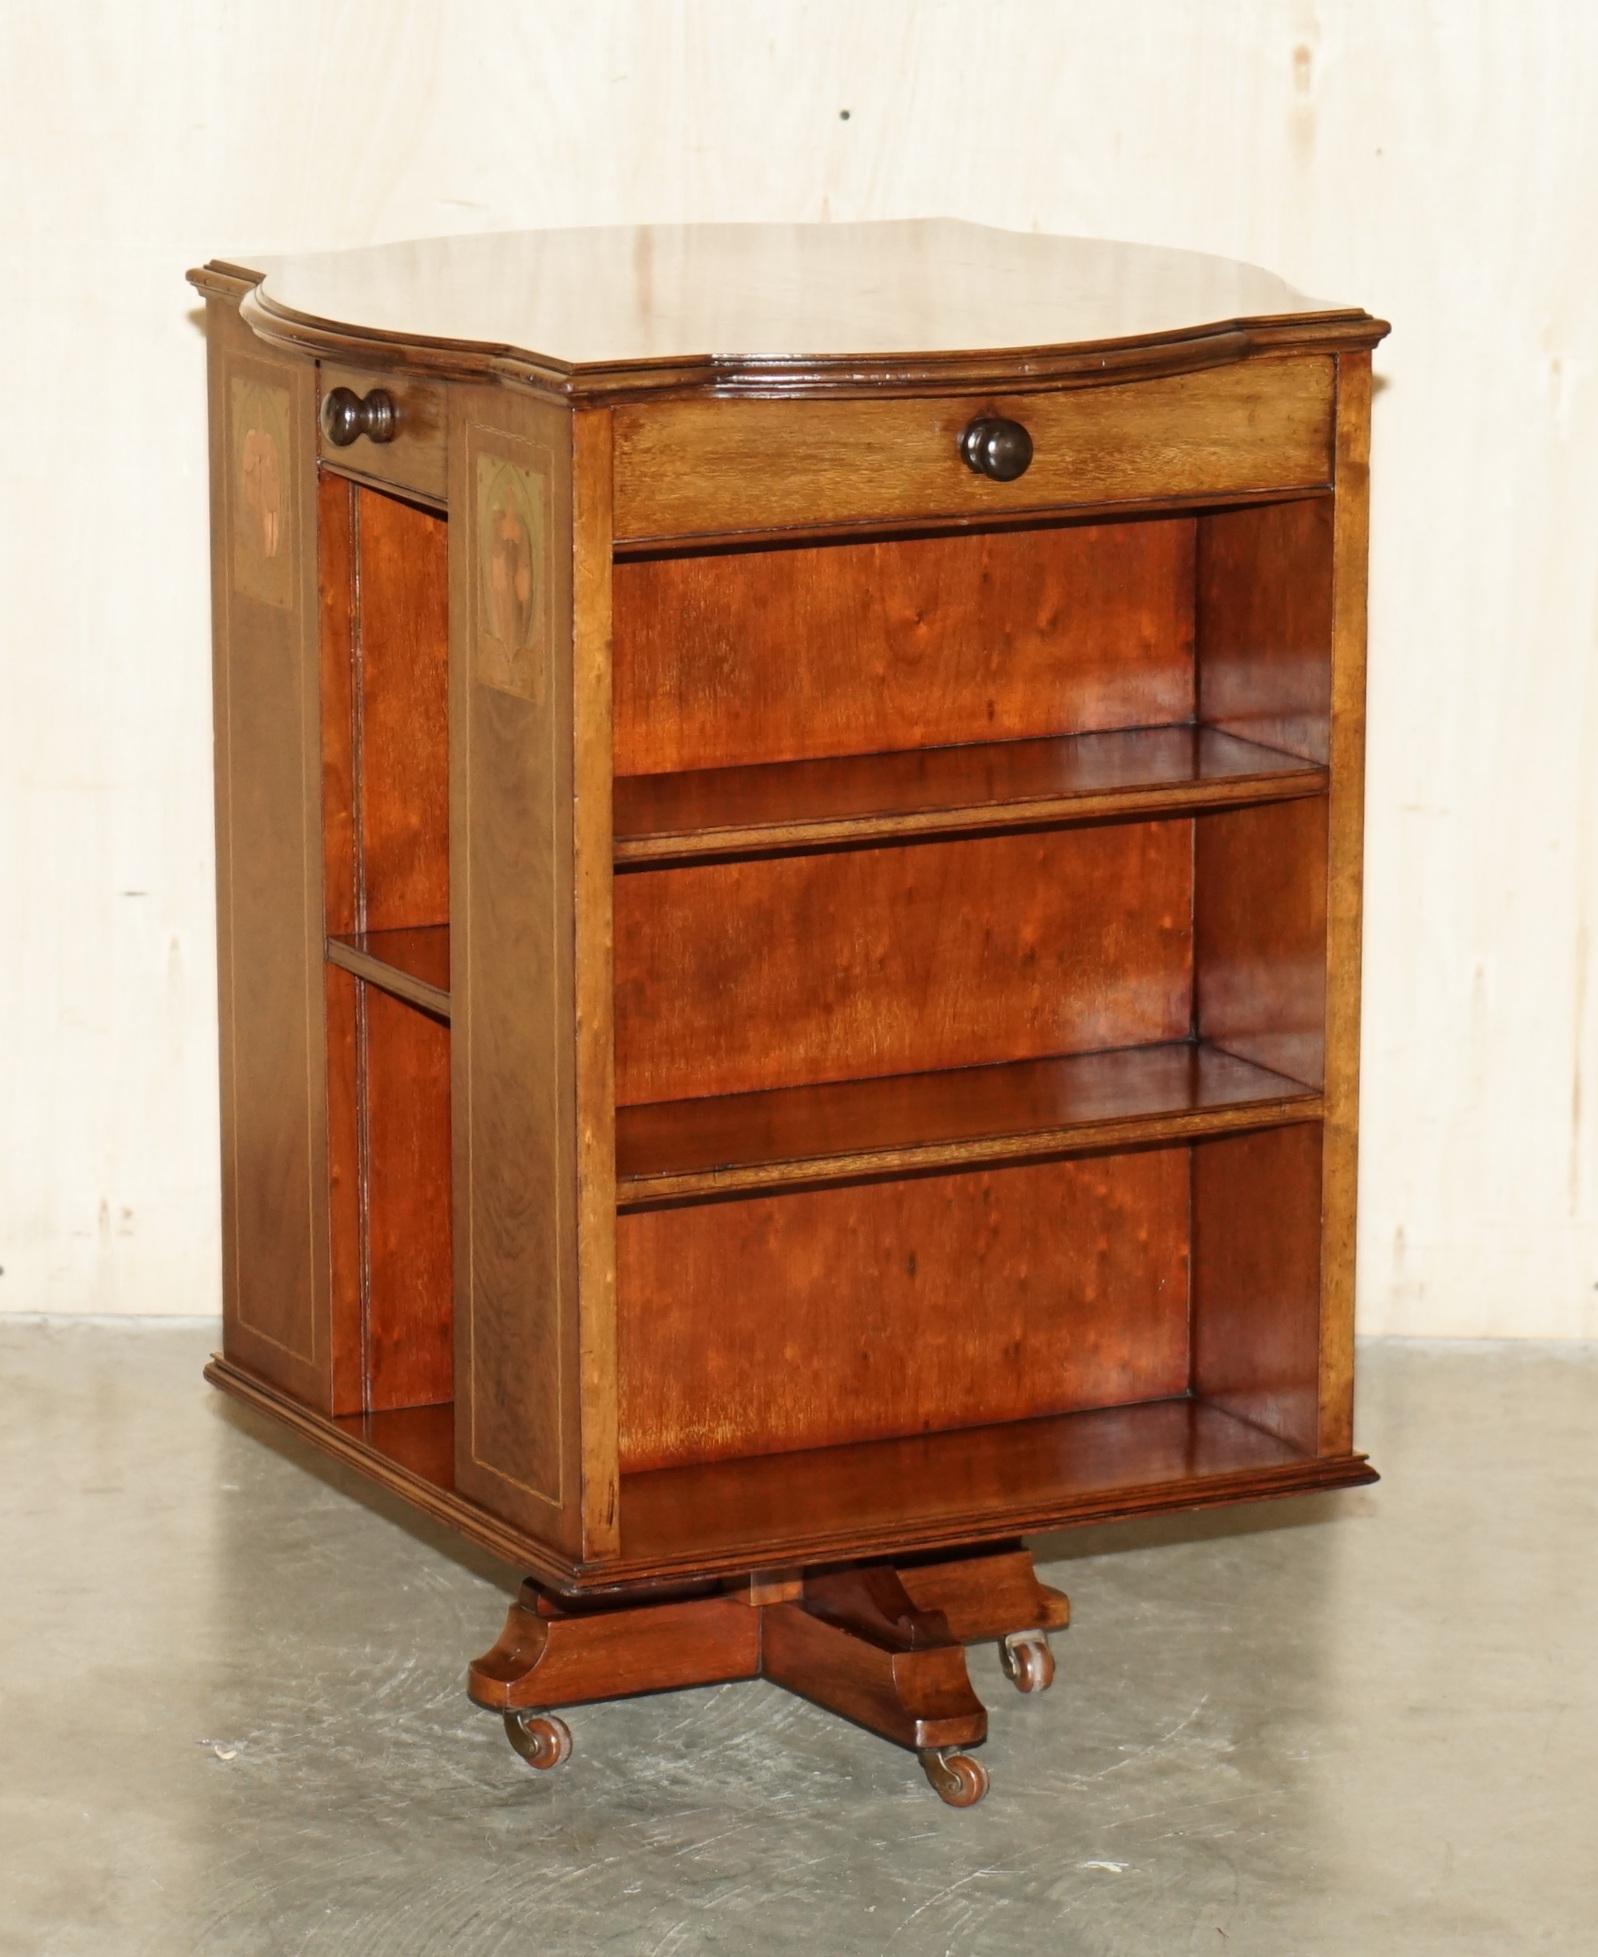 Royal House Antiques

Royal House Antiques is delighted to offer for sale this very fine antique very fine, hand made in England in the Art Nouveau taste, oak revolving bookcase table 

Please note the delivery fee listed is just a guide, it covers